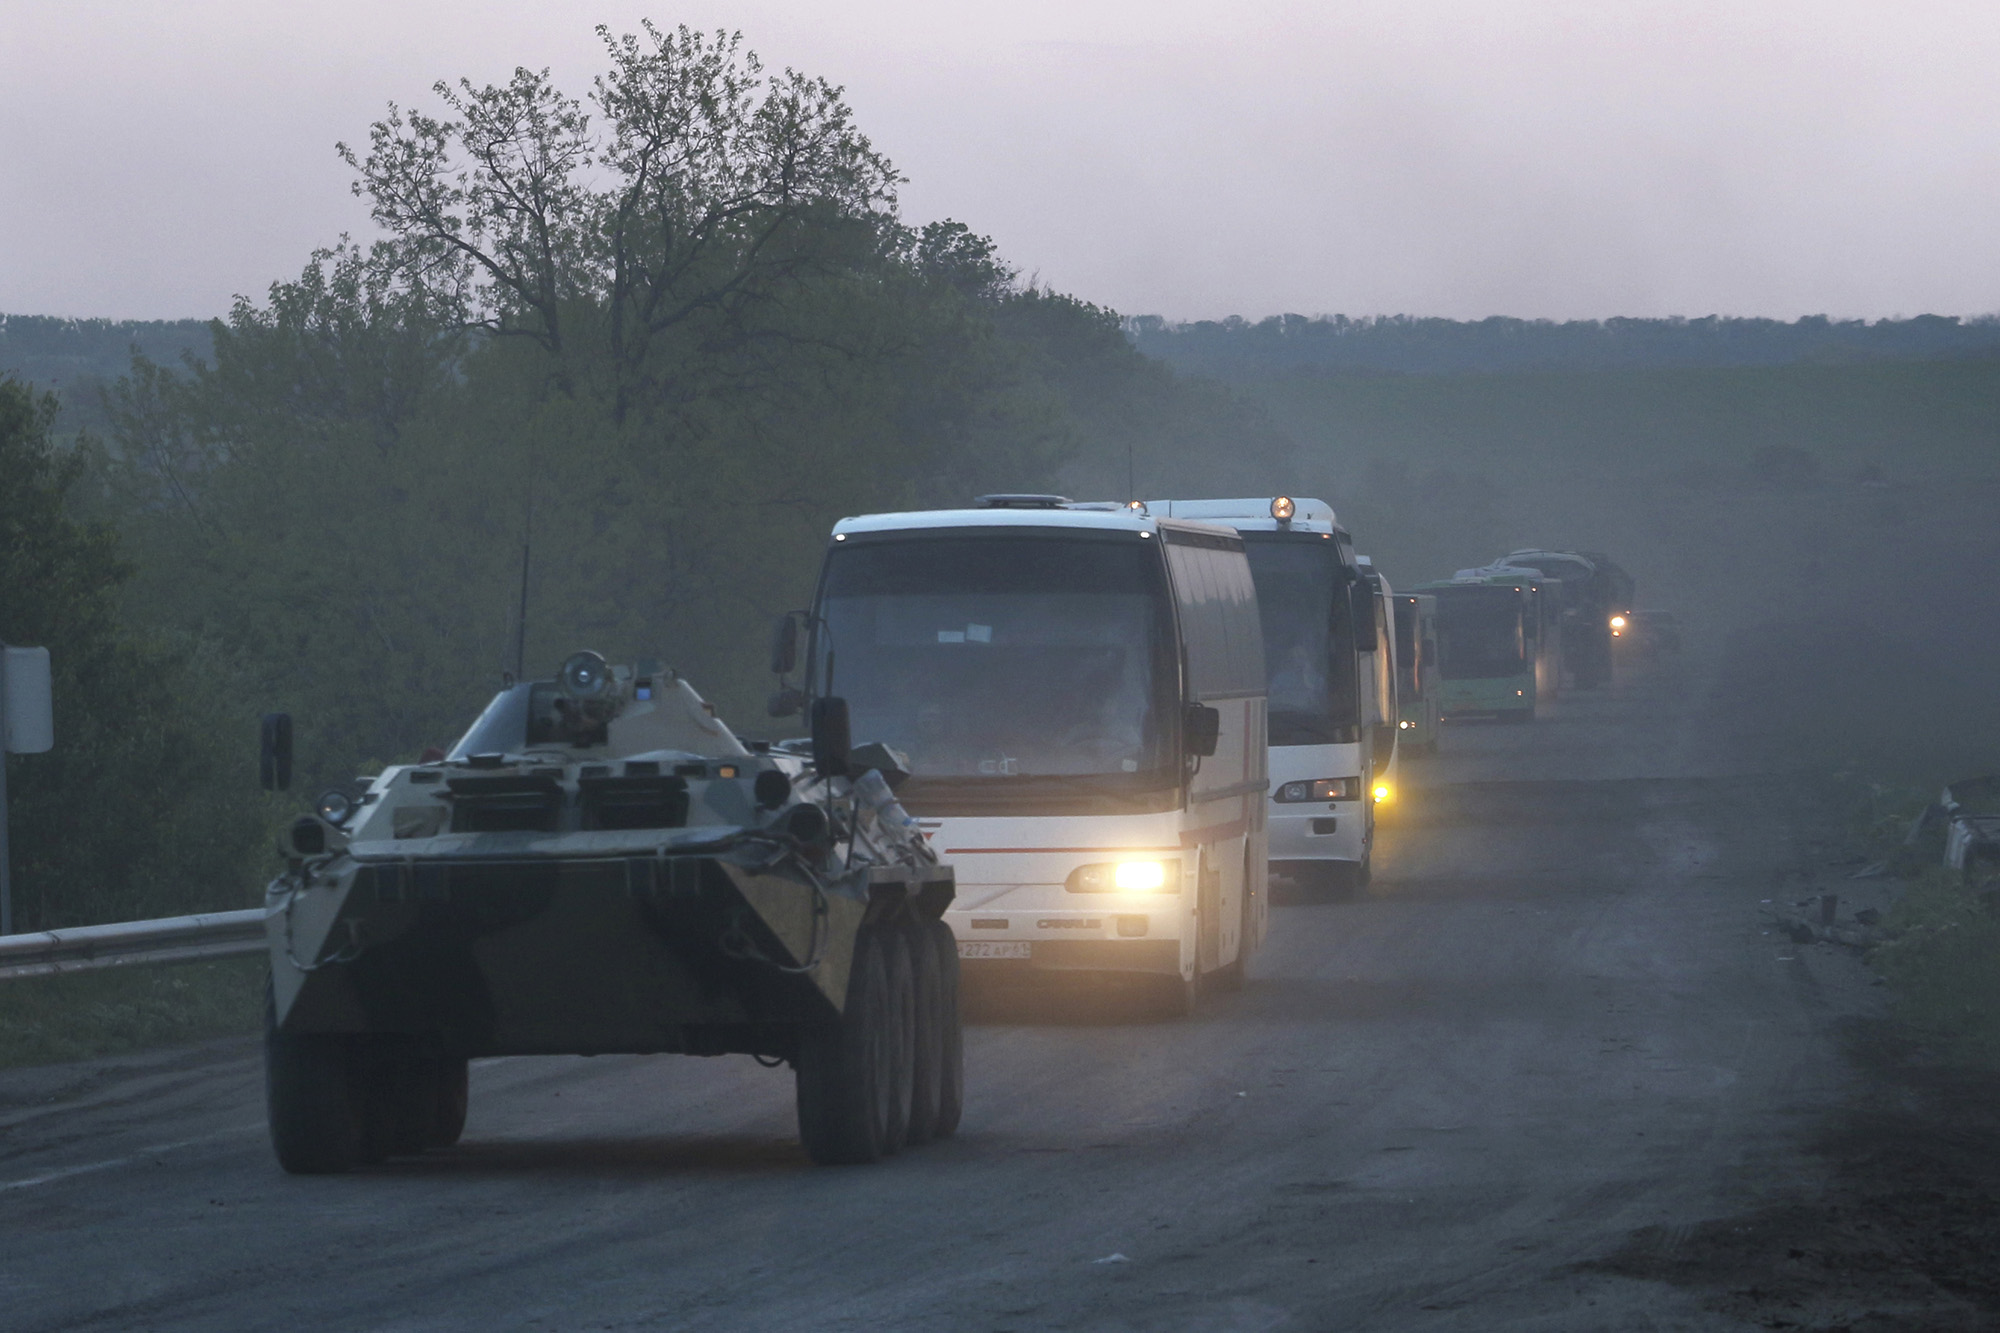 An APC from the Donetsk People's Republic militia accompanies buses with Ukrainian servicemen to the penal colony in Olenivka after they left the besieged Azovstal steel plant in Mariupol, Ukraine on Friday May 20.